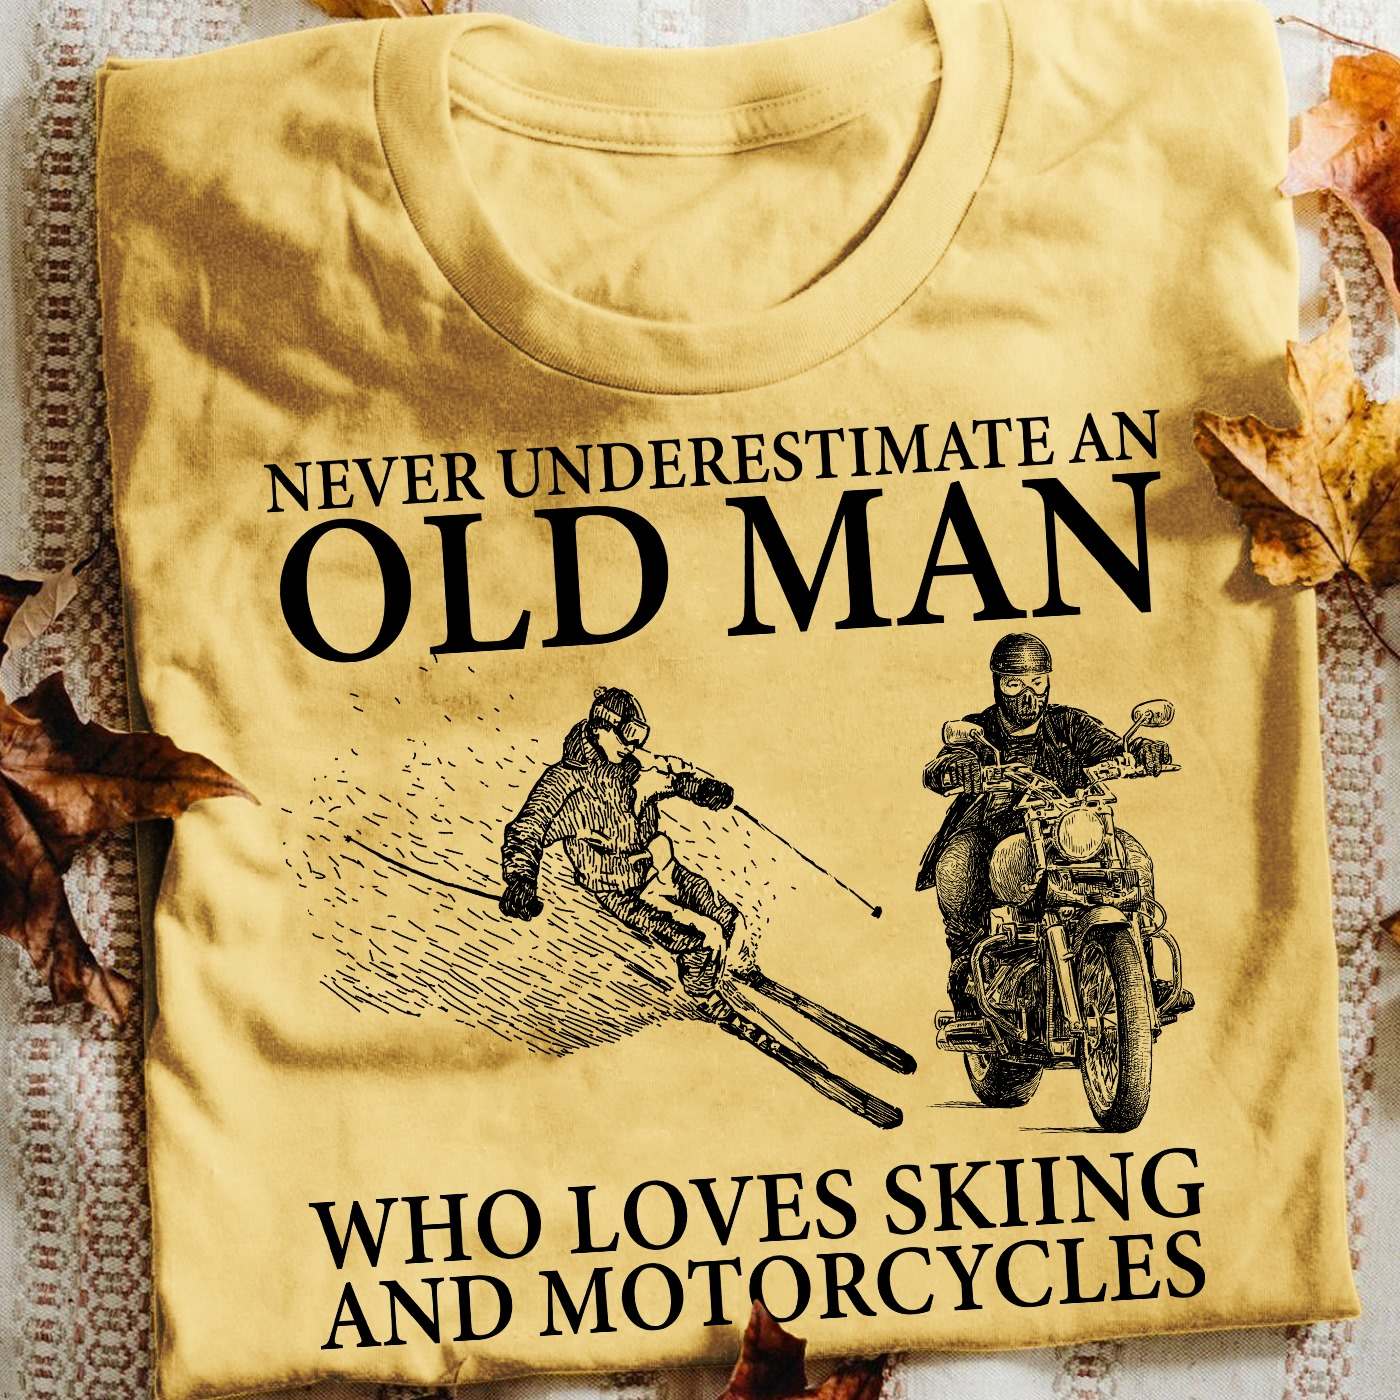 Never underestimate an old man who loves skiing and motorcycles - Love skiing